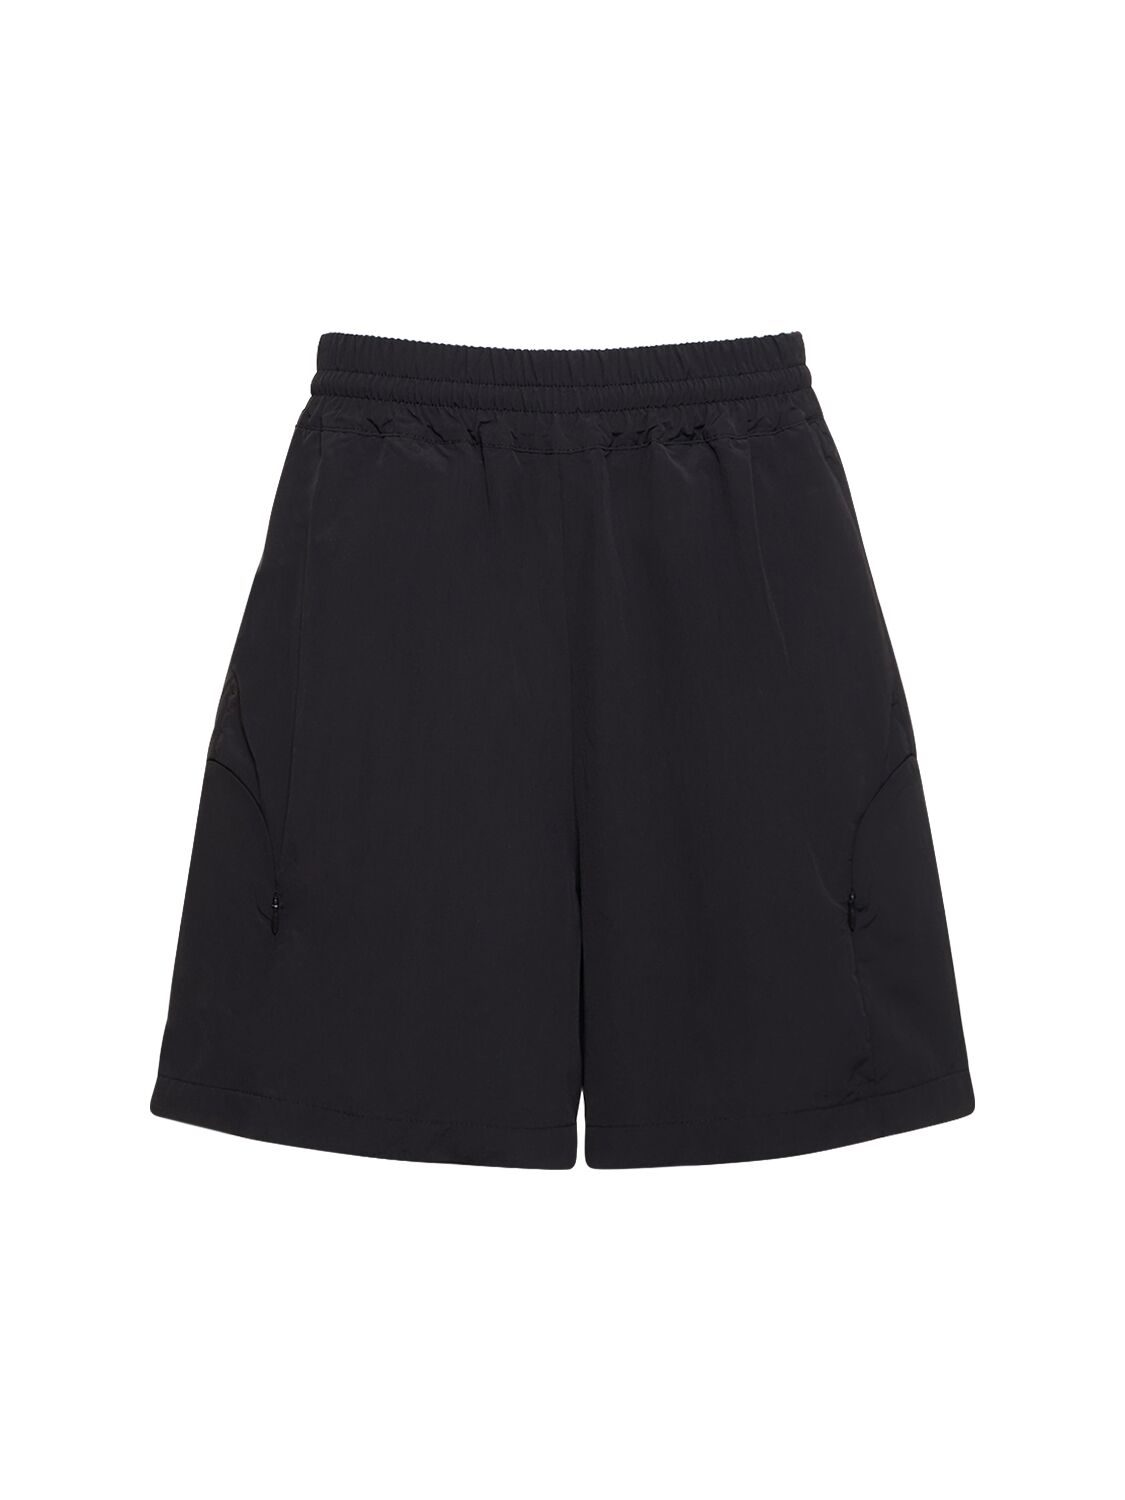 Image of Arch Tech Blend Shorts